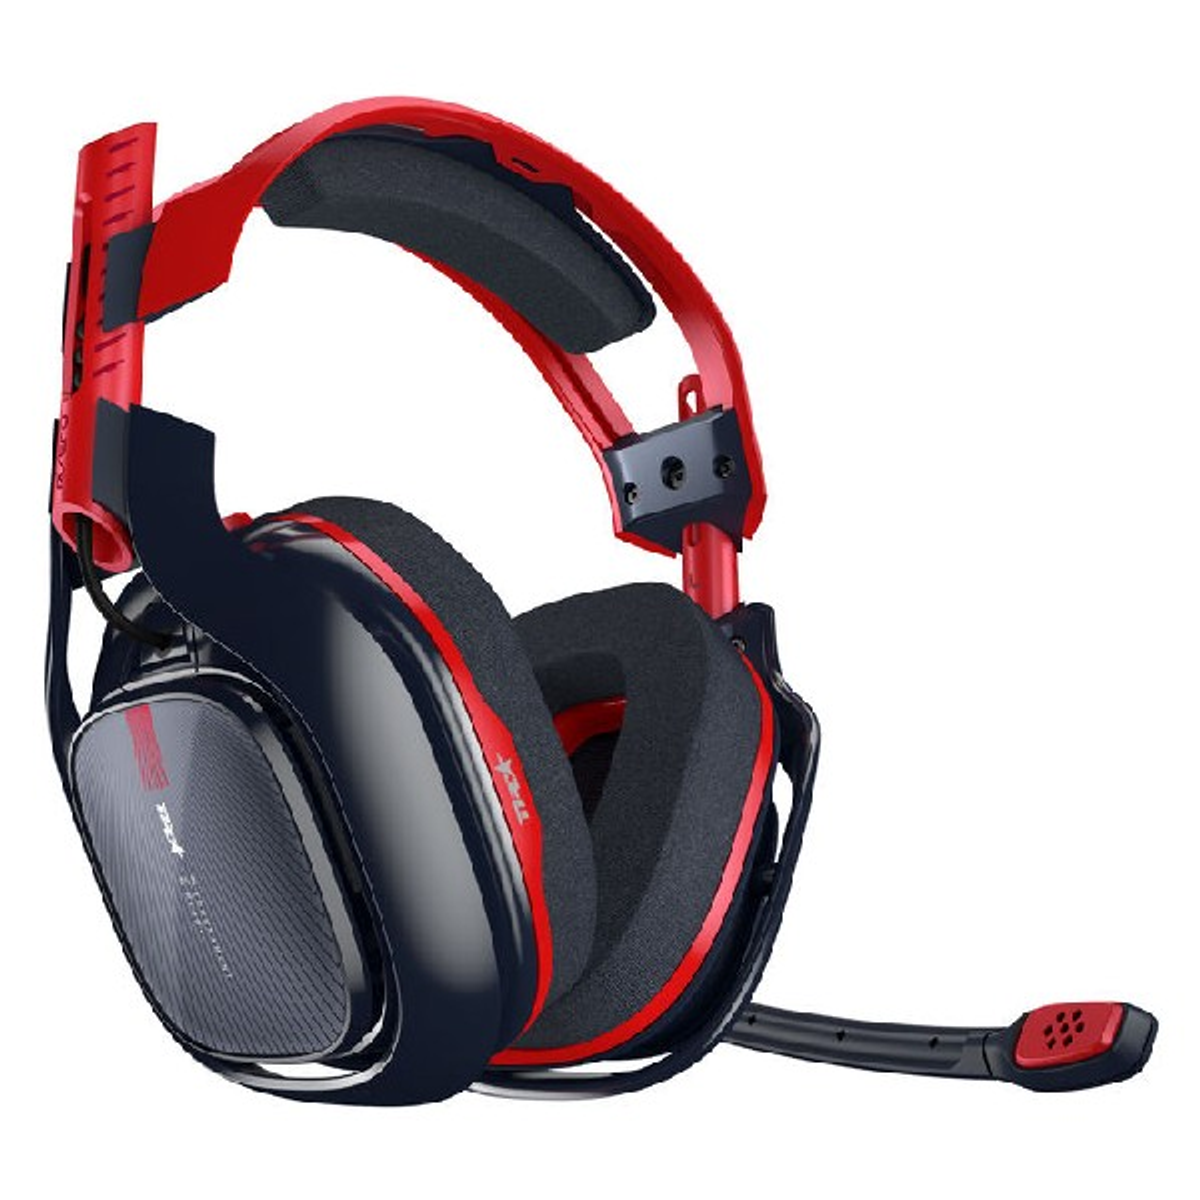 Over-ear Headset ASTRO TR EDS ANNIVERSARY Gaming A40 Rot/Blau 10TH 939-001668 RED/BLUE,